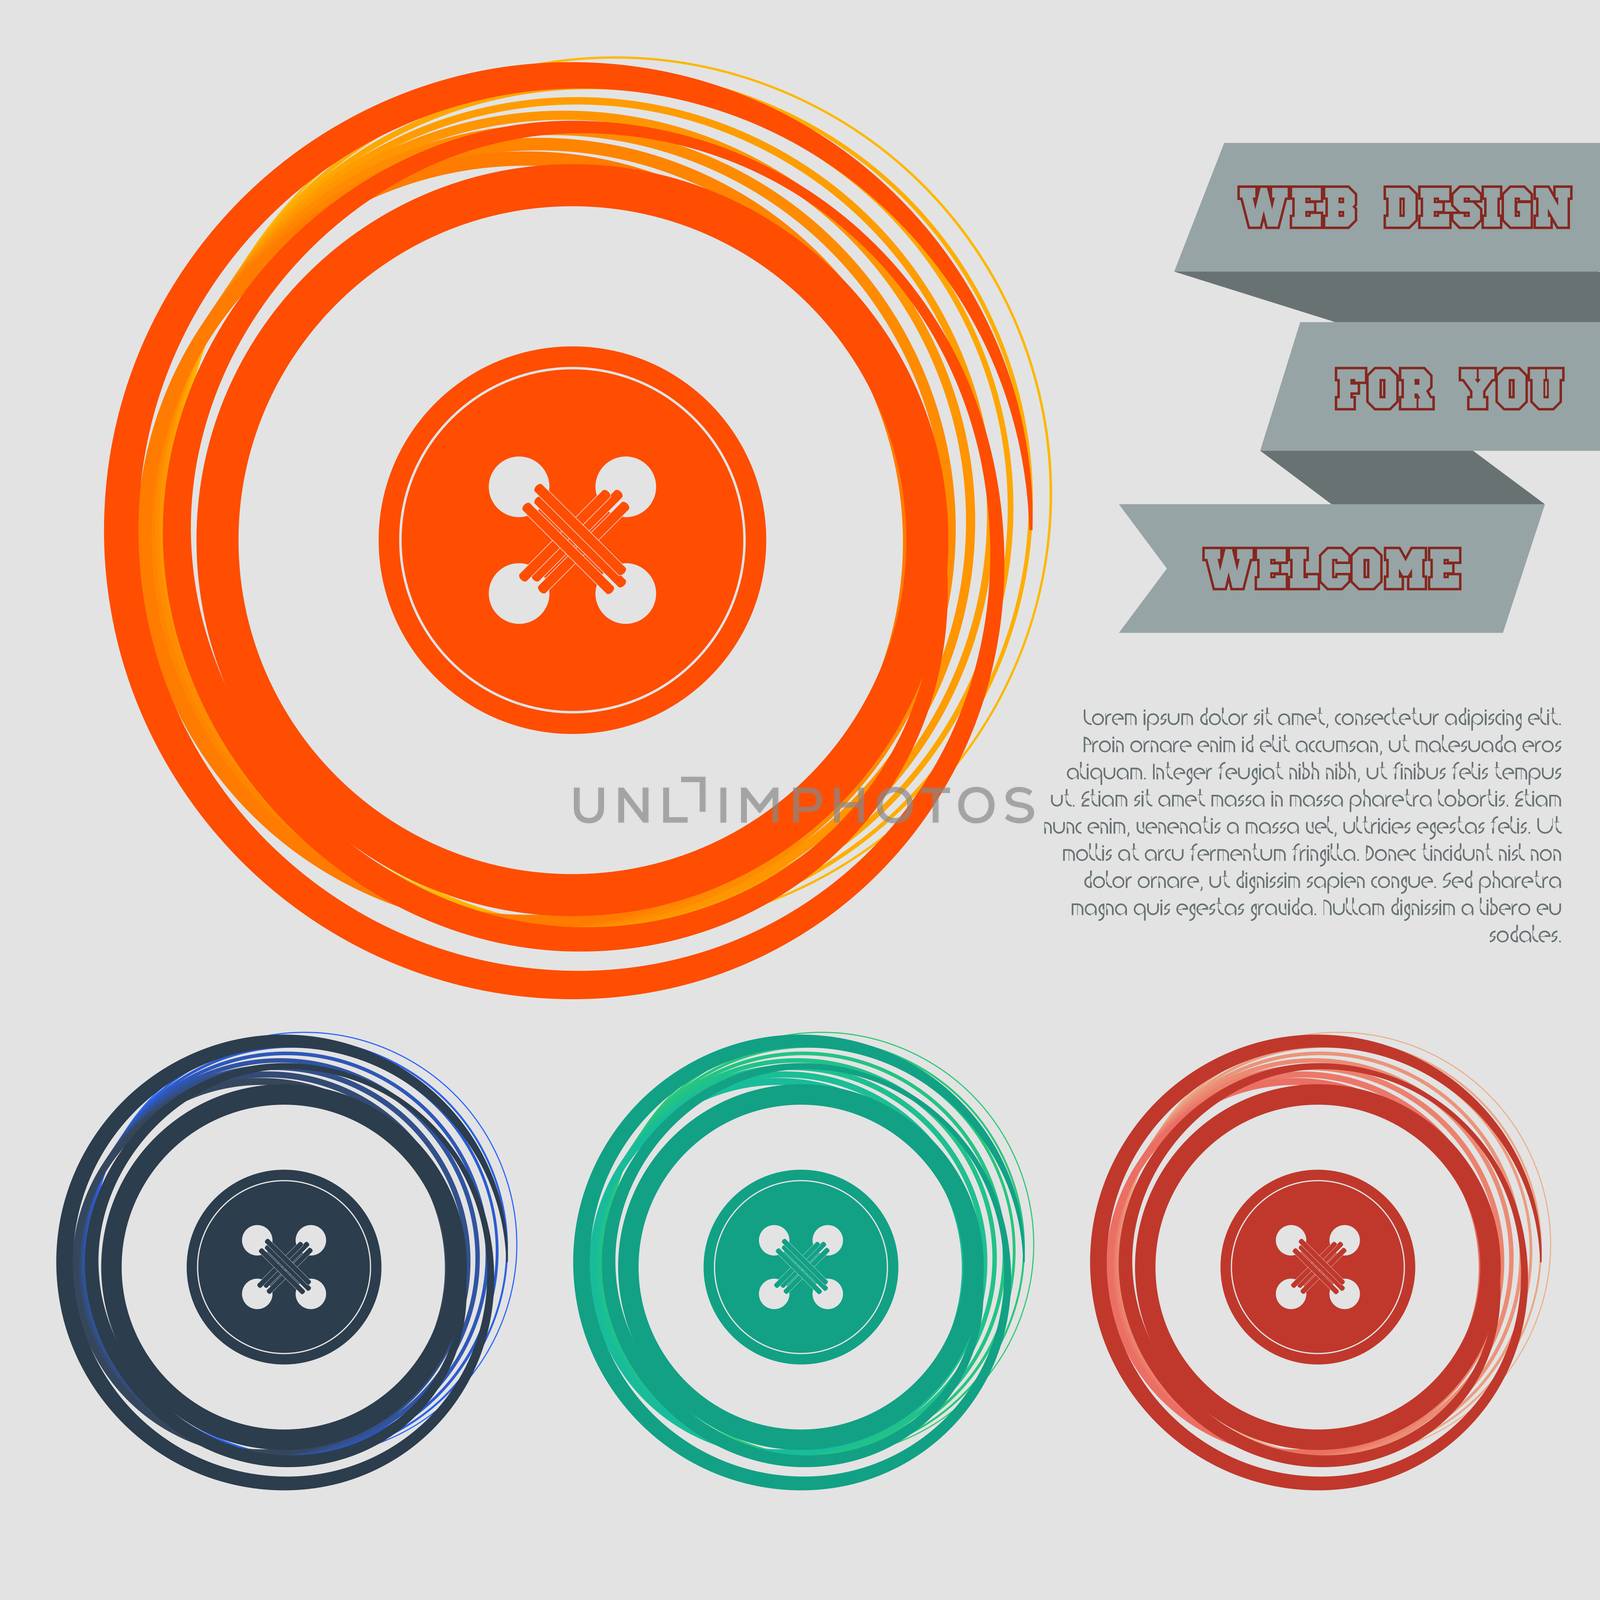 button for clothes icon on the red, blue, green, orange buttons for your website and design with space text. illustration